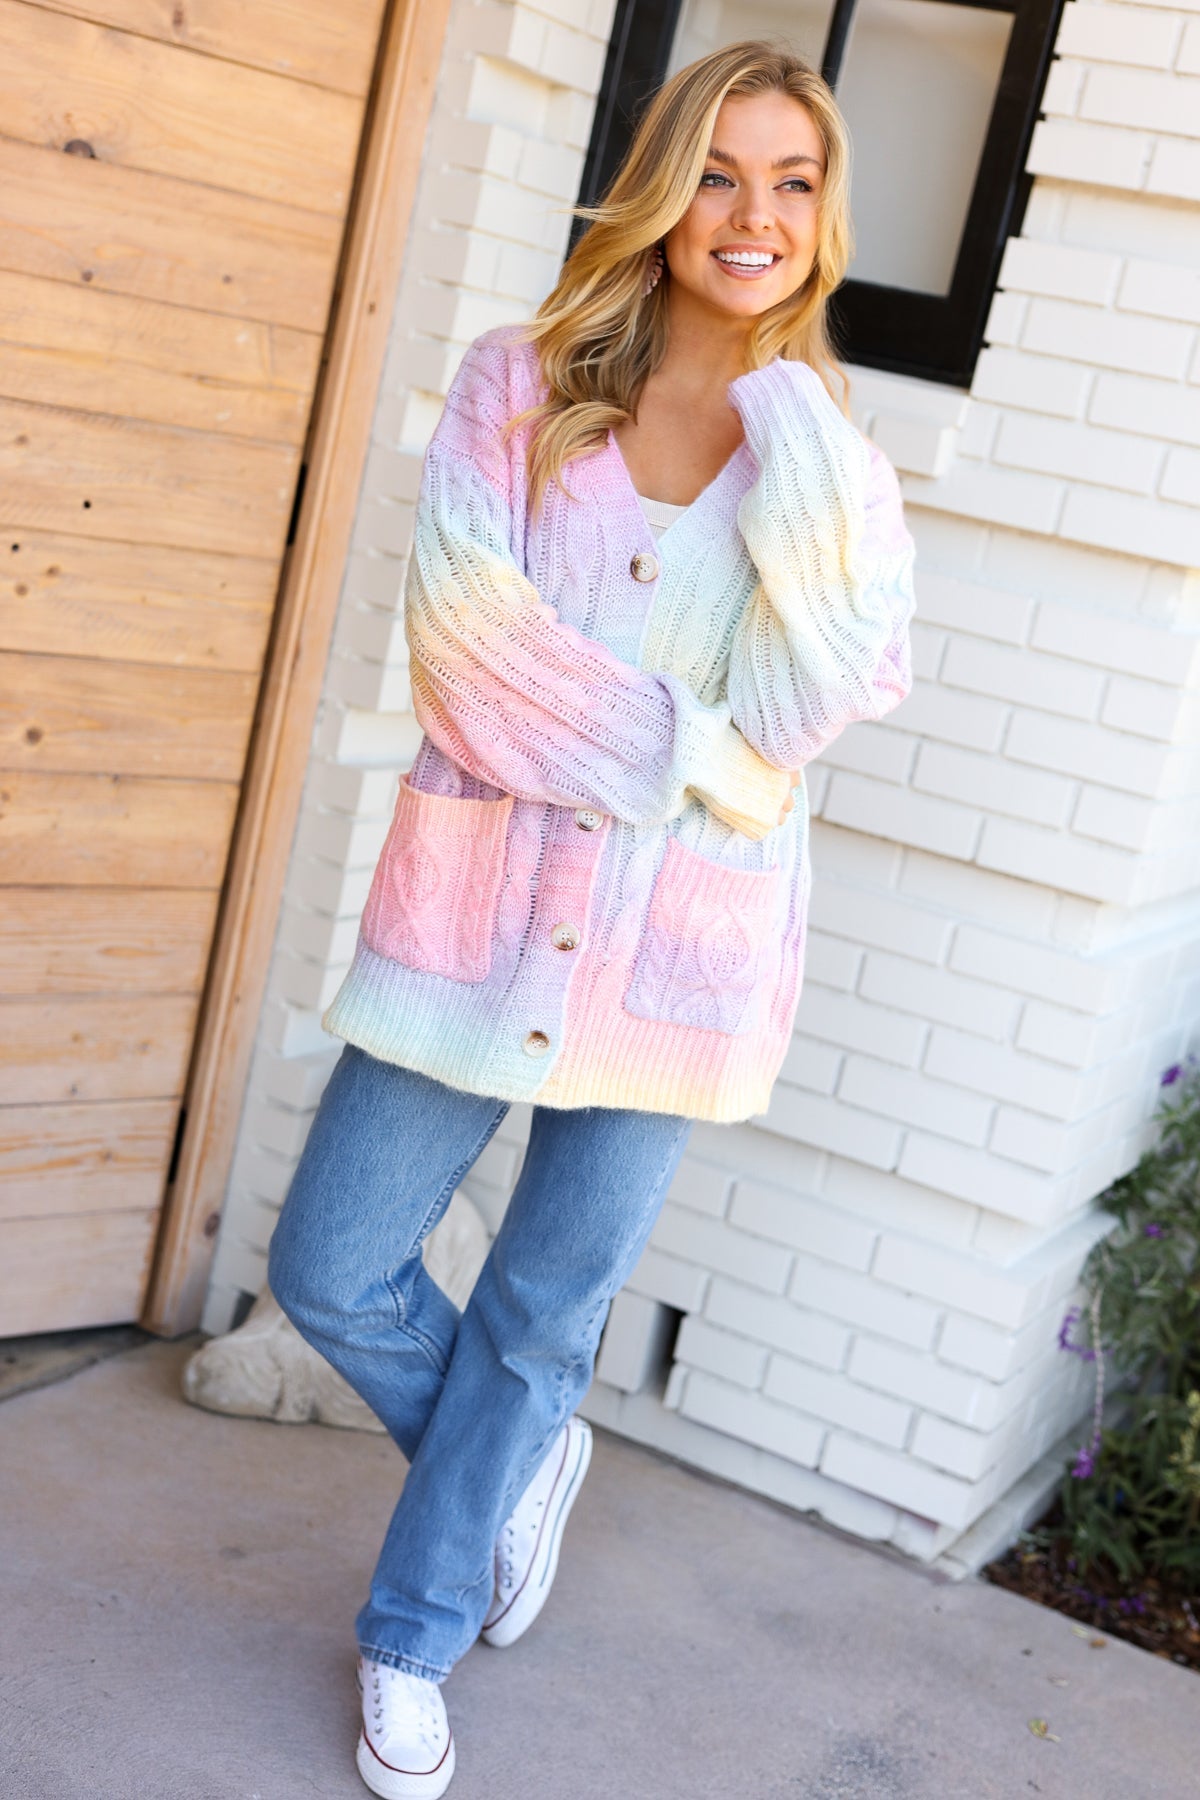 Face The Day Rainbow Ombre Cable Knit Cardigan - Sybaritic Bags & Clothing